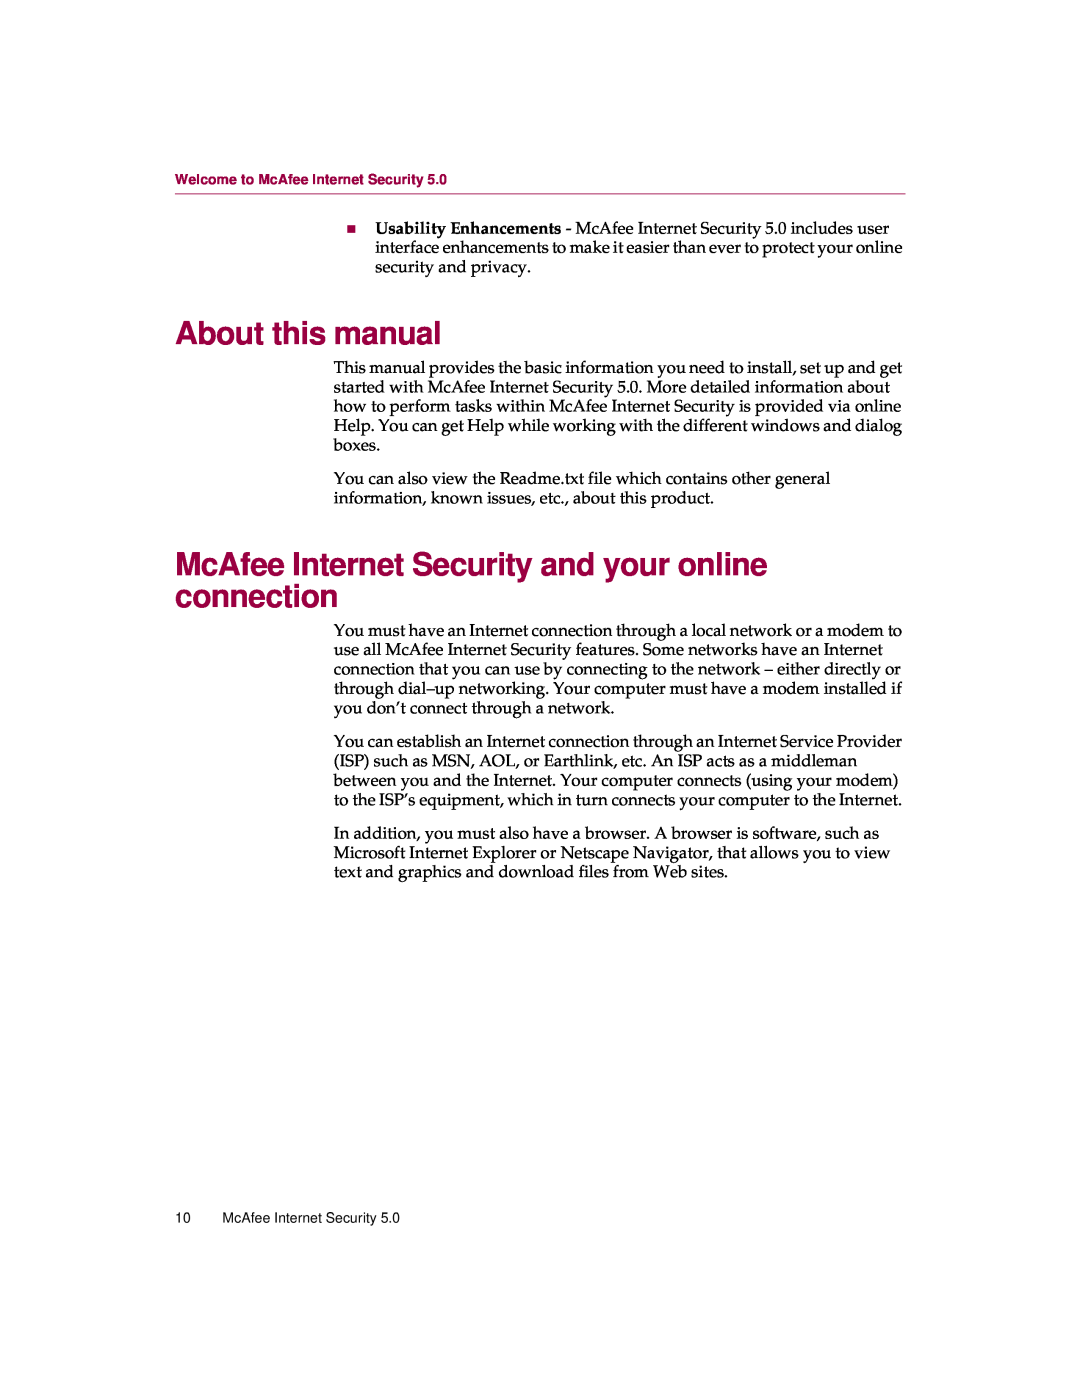 McAfee 5 About this manual, McAfee Internet Security 